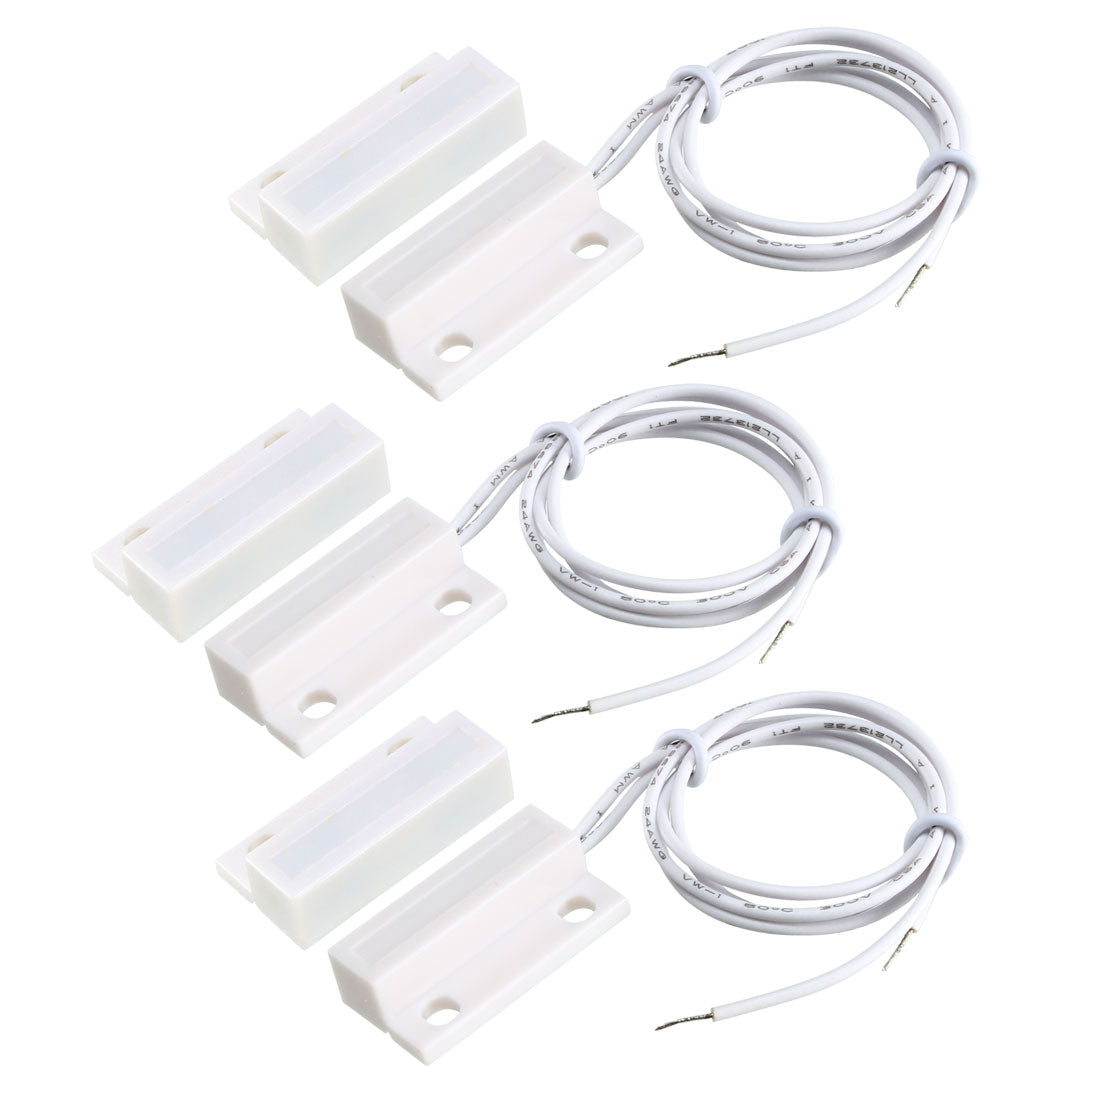 uxcell Uxcell 30pcs MC-38 Surface Mount Wired NC Door Sensor Alarm Magnetic Reed Switch White